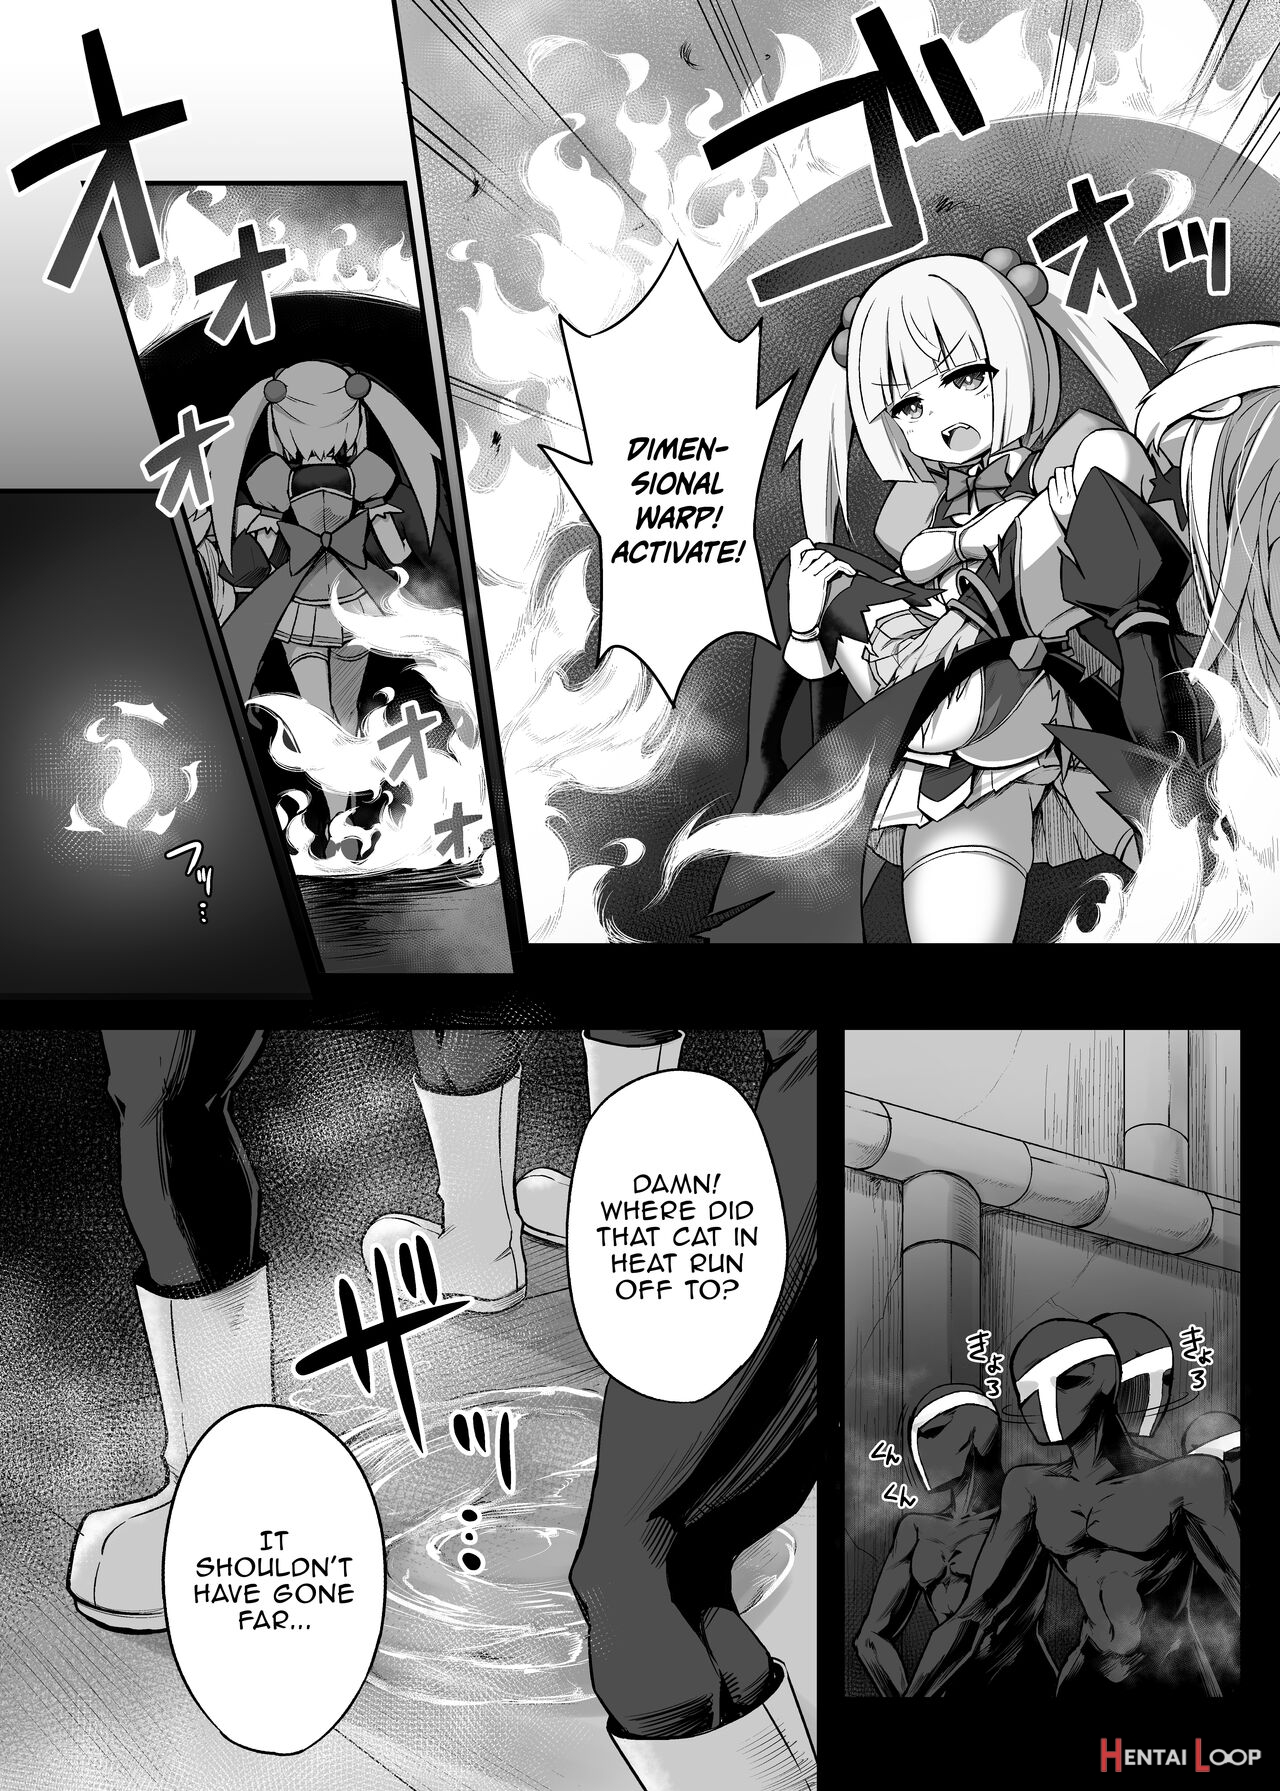 Masochist Cat X Magic Girl ~a Manga In Which The Evil Magical Girl Is Put On A Leash And Domesticated By The Good Magical Girl~ page 12